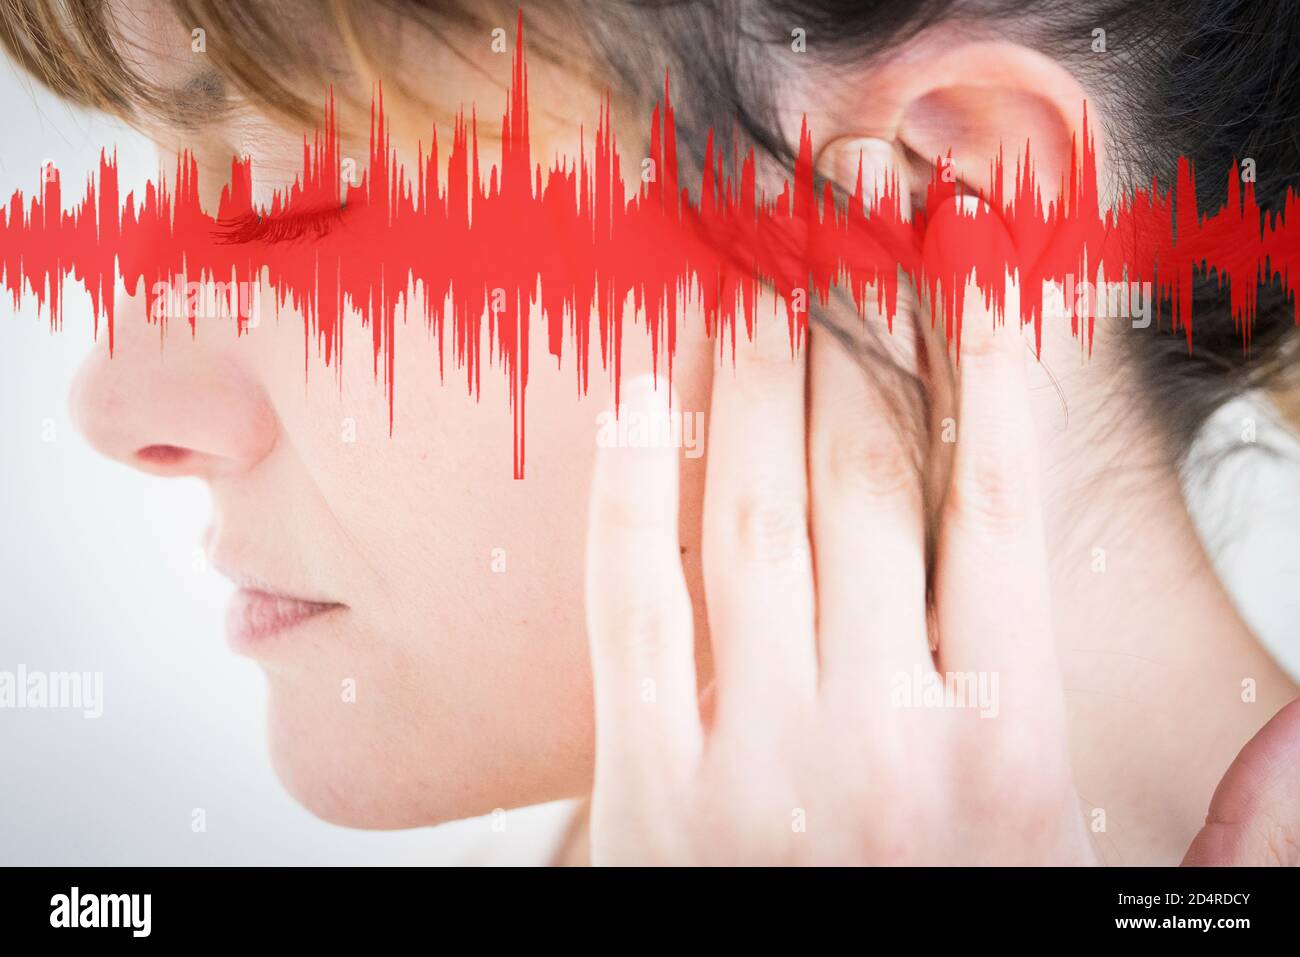 Close-up of the ear of a woman, with graphics representing sound waves. Stock Photo